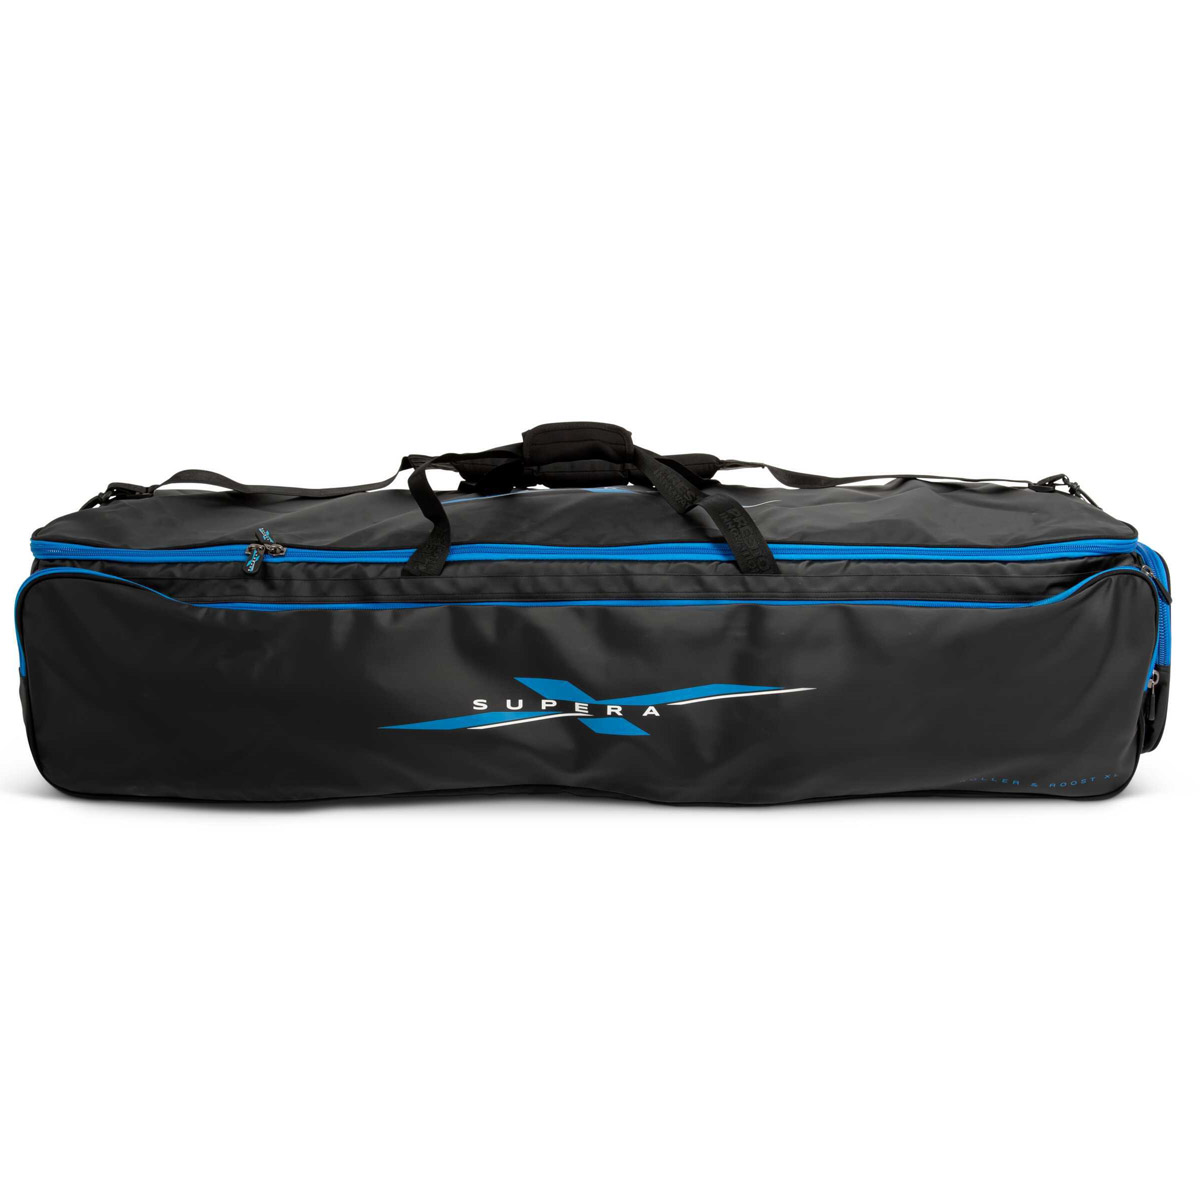 Preston Innovations Supera Roller And Roost Bag